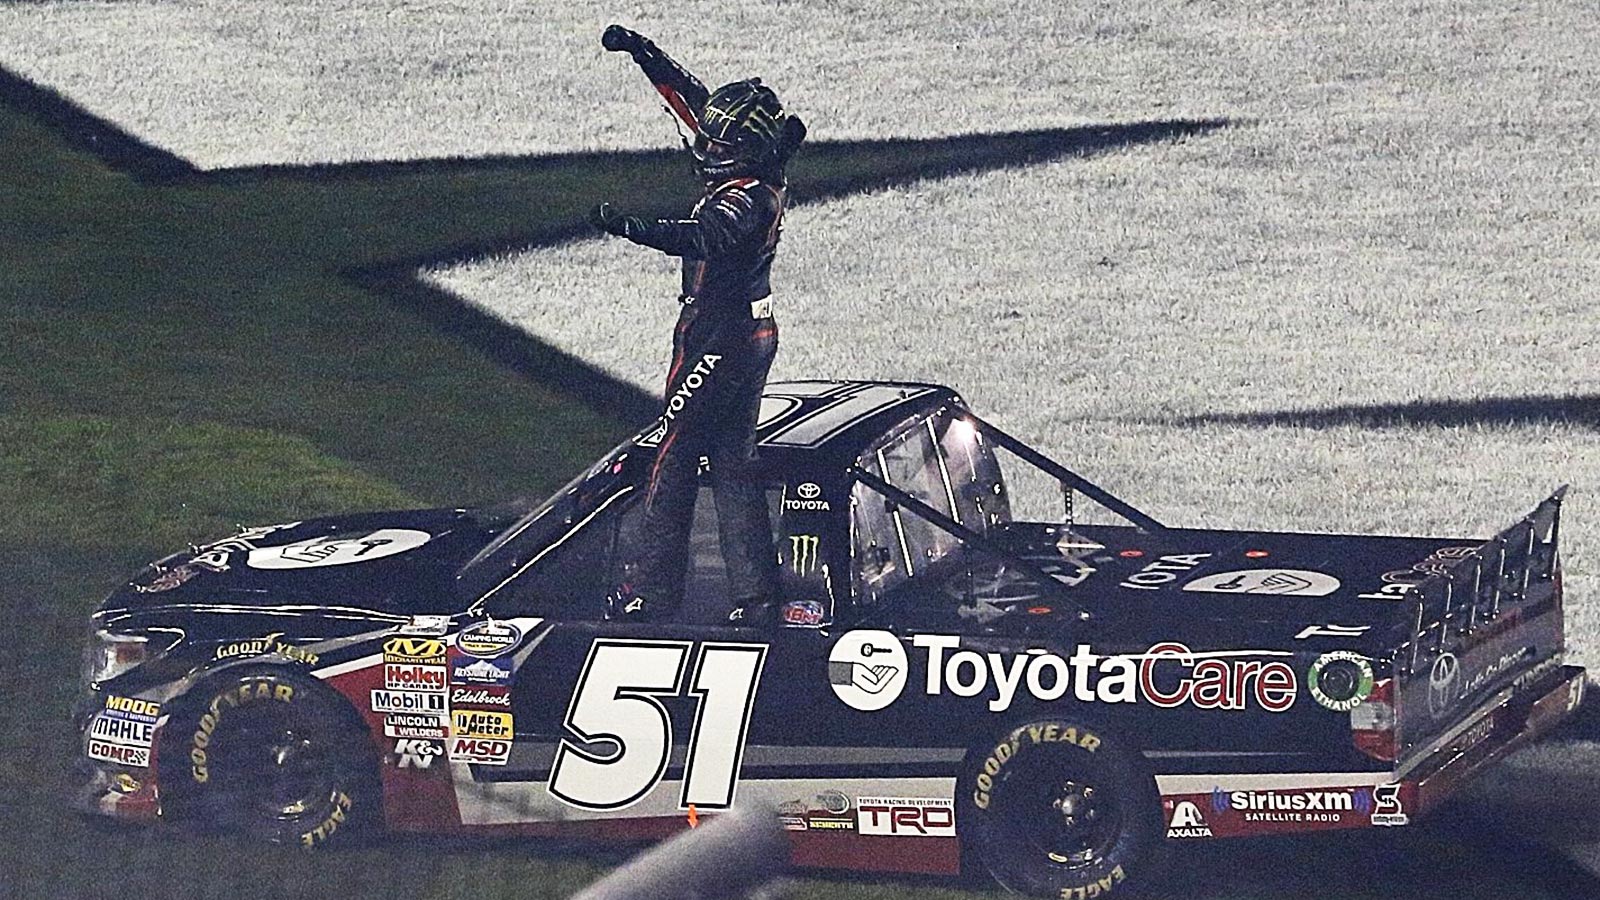 Last-second man: Kyle Busch wins Truck opener with daring move